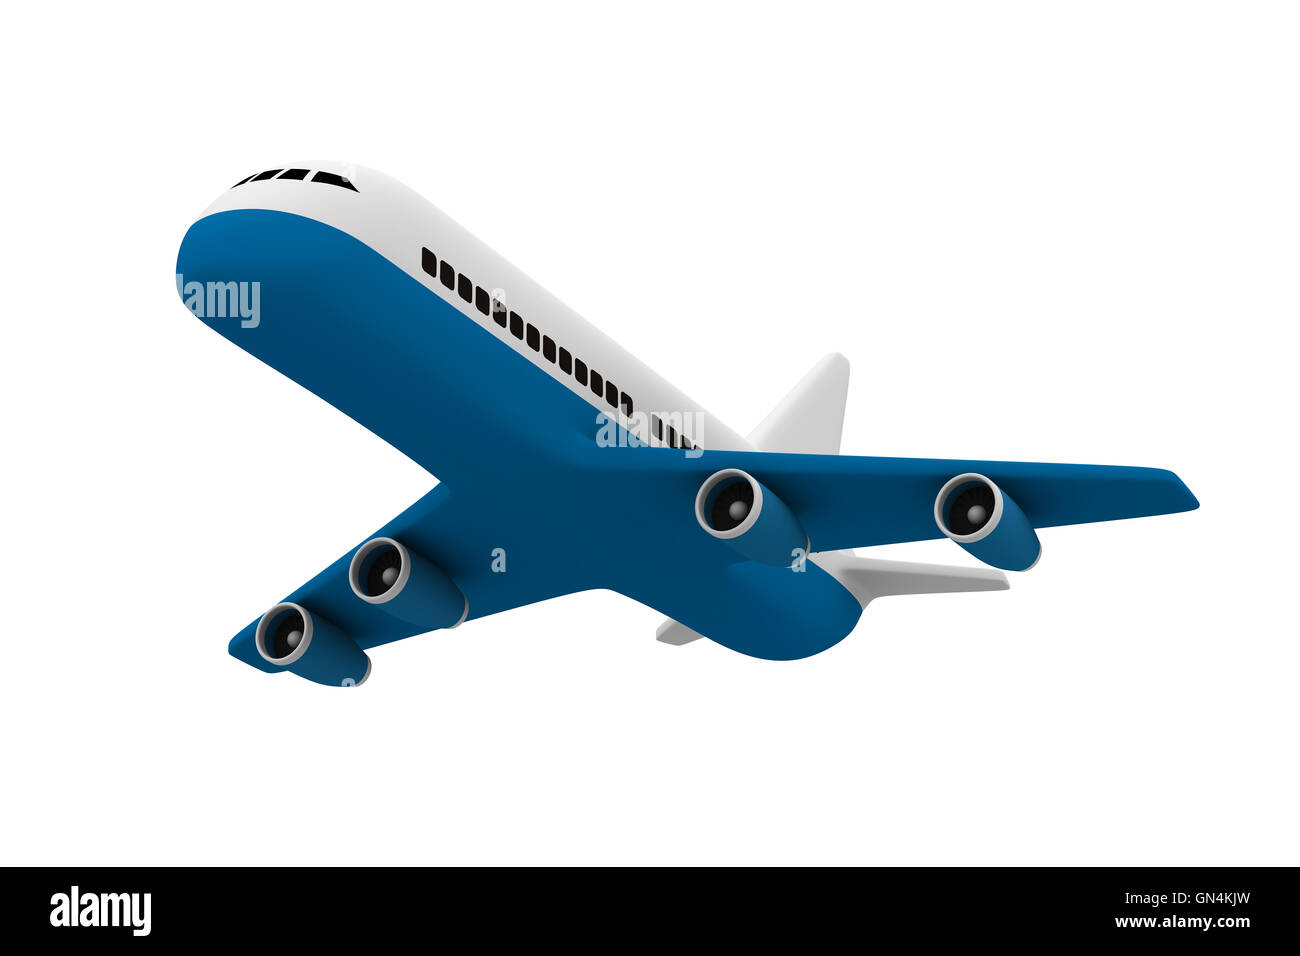 airplane on white background. Isolated 3D image Stock Photo